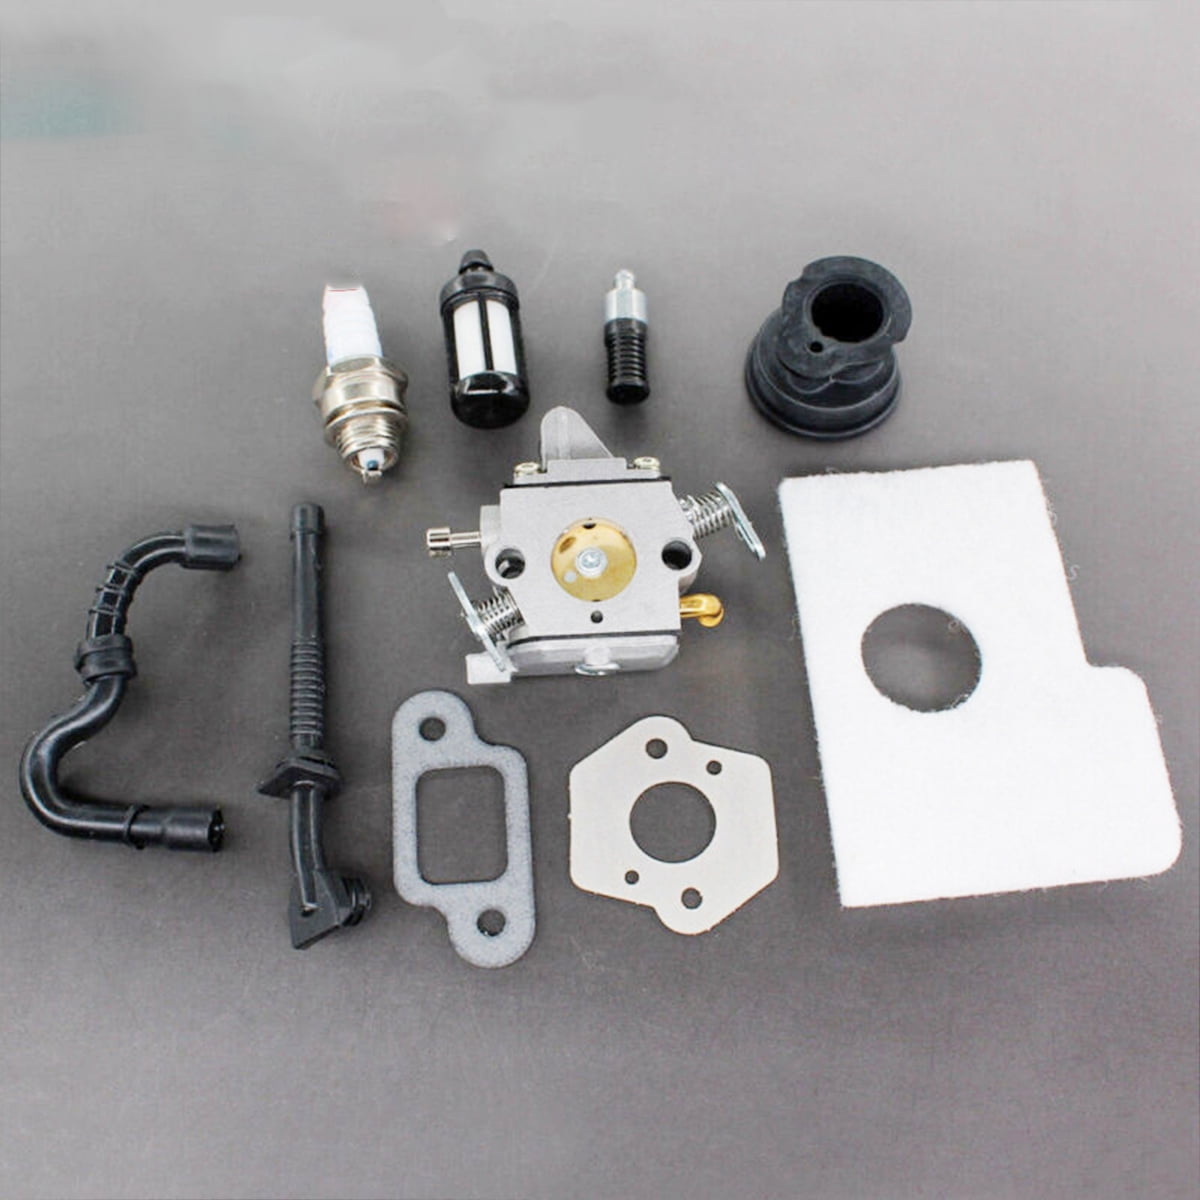 Carburetor Carb Kit for STIHL MS170 MS180 017 018 Chainsaw Filter Fuel Oil Line